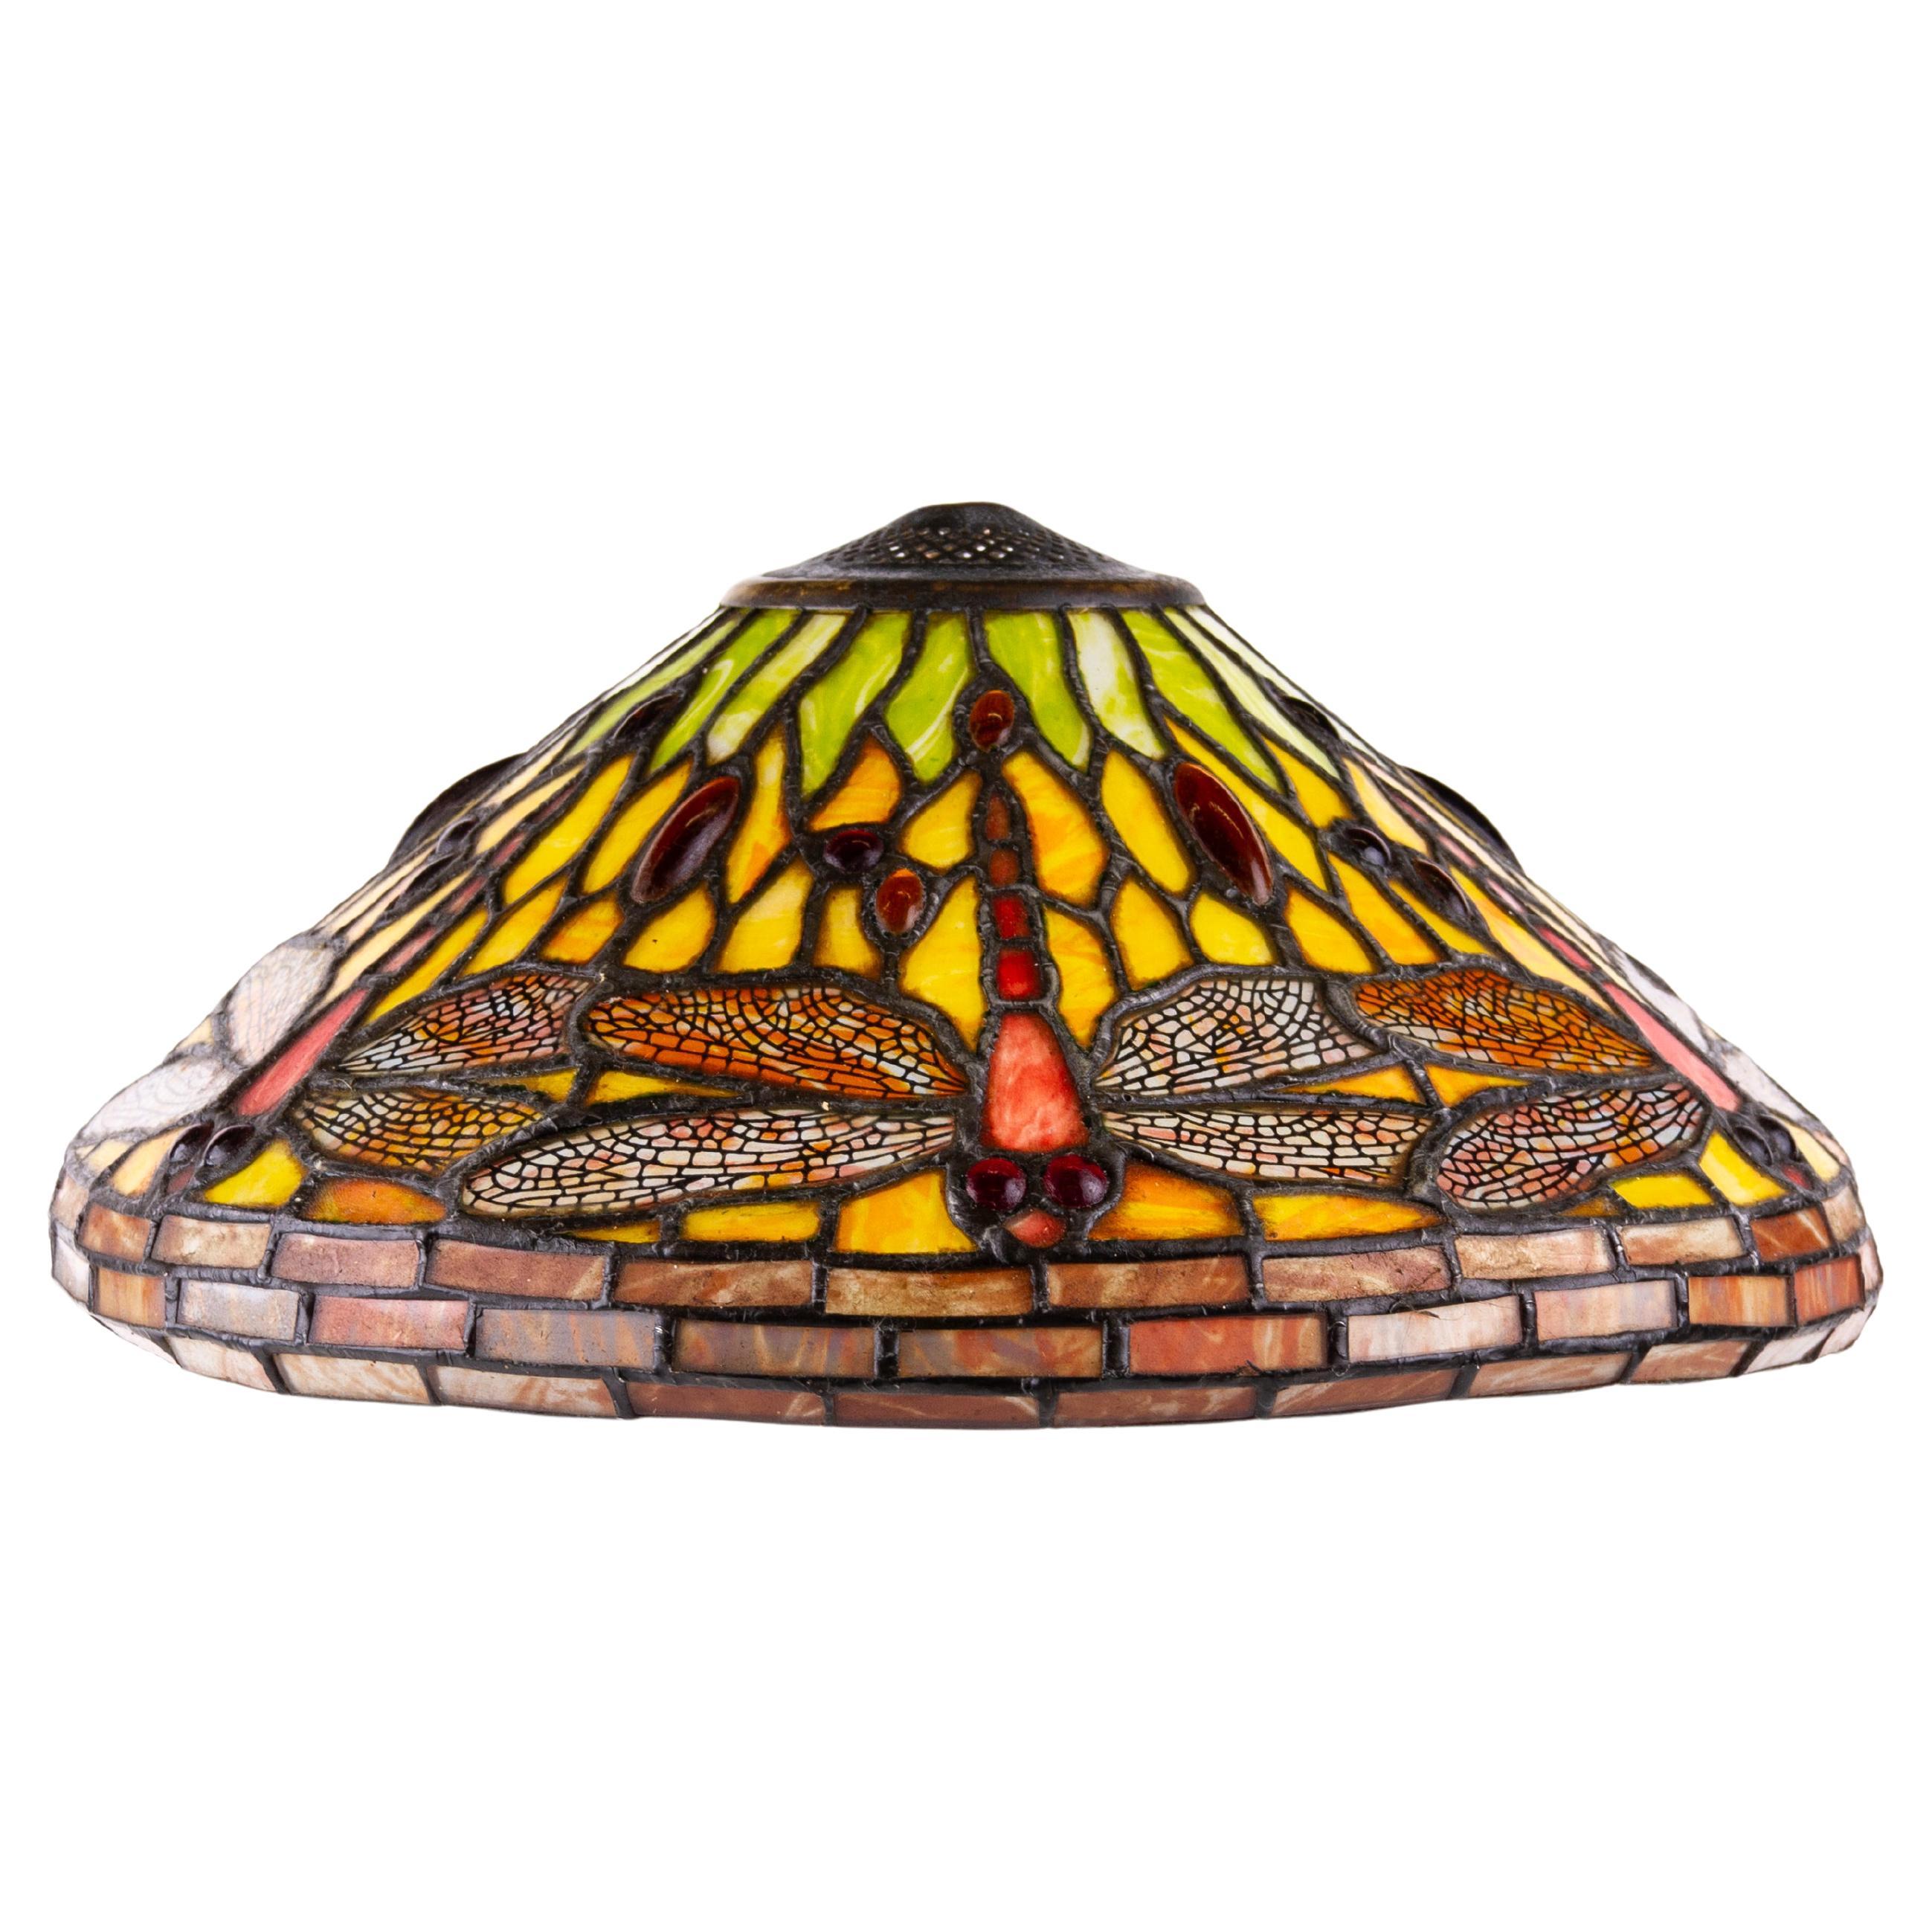 Tiffany Style Stained-Glass Dragonfly Lamp Shade  For Sale